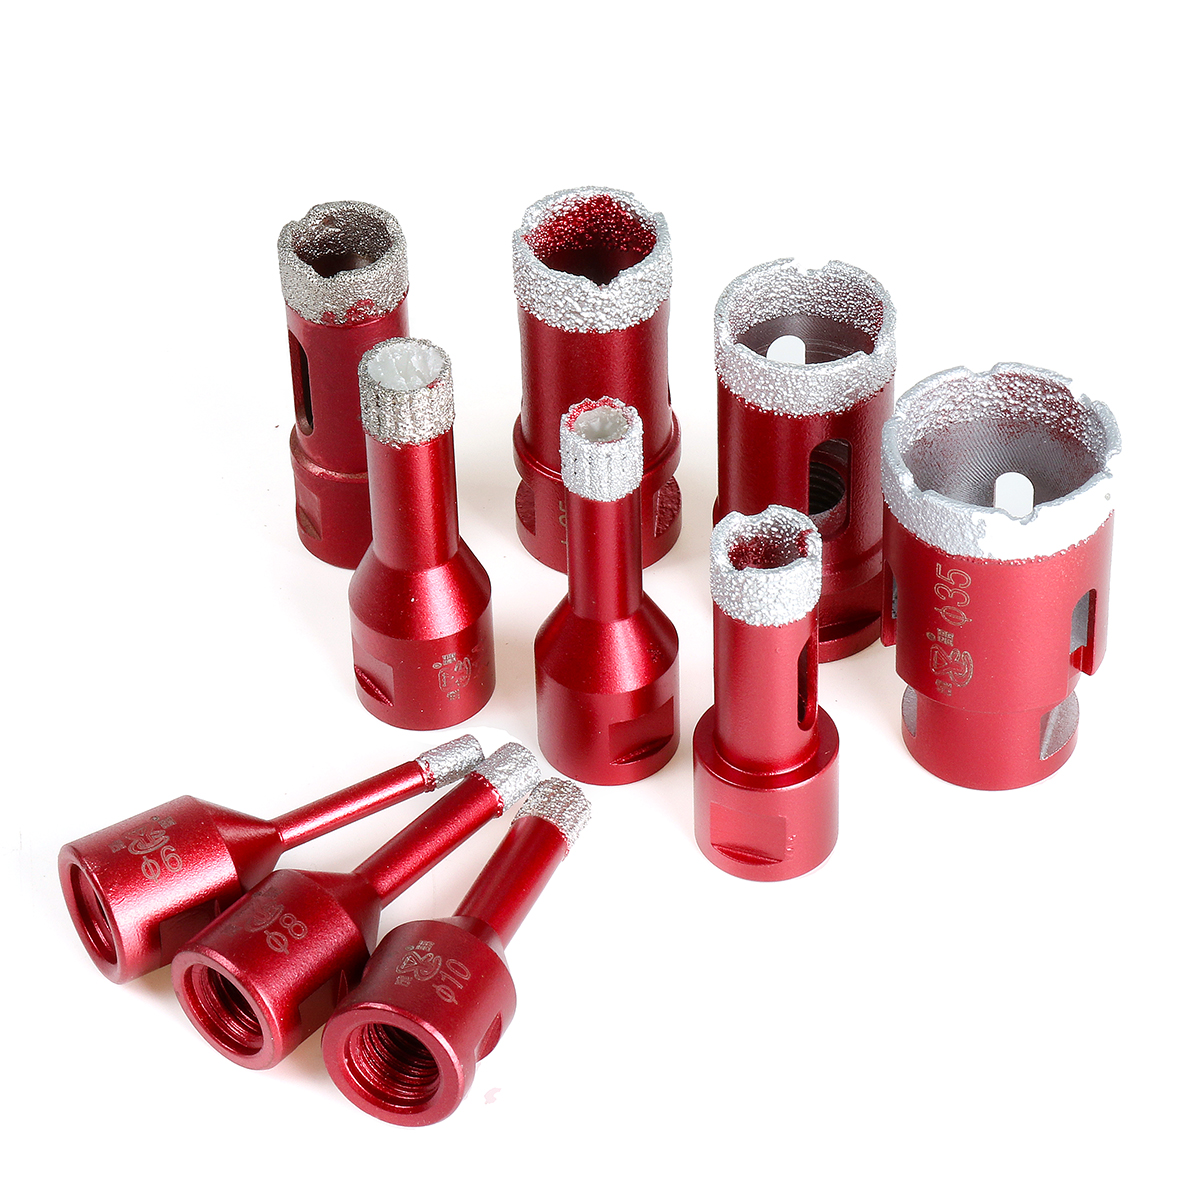 6mm-35mm-M14-Diamond-Drill-Bits-Drilling-Hole-Saw-Cutter-for-Tile-Marble-Granite-Stone-Use-Angle-Gri-1557775-1